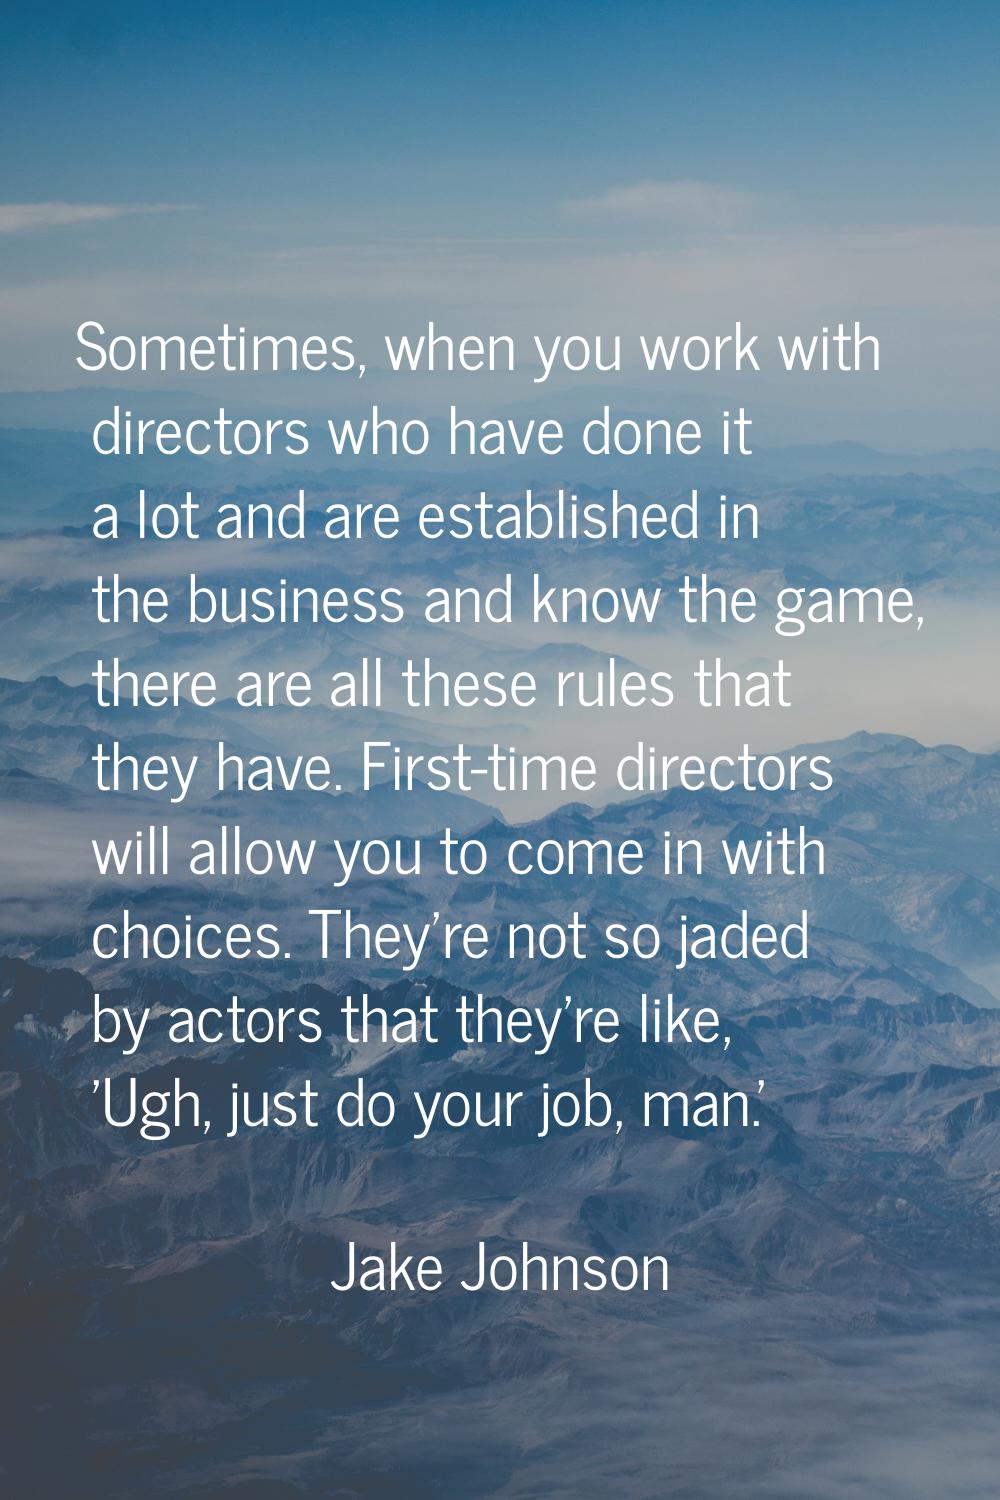 Sometimes, when you work with directors who have done it a lot and are established in the business 